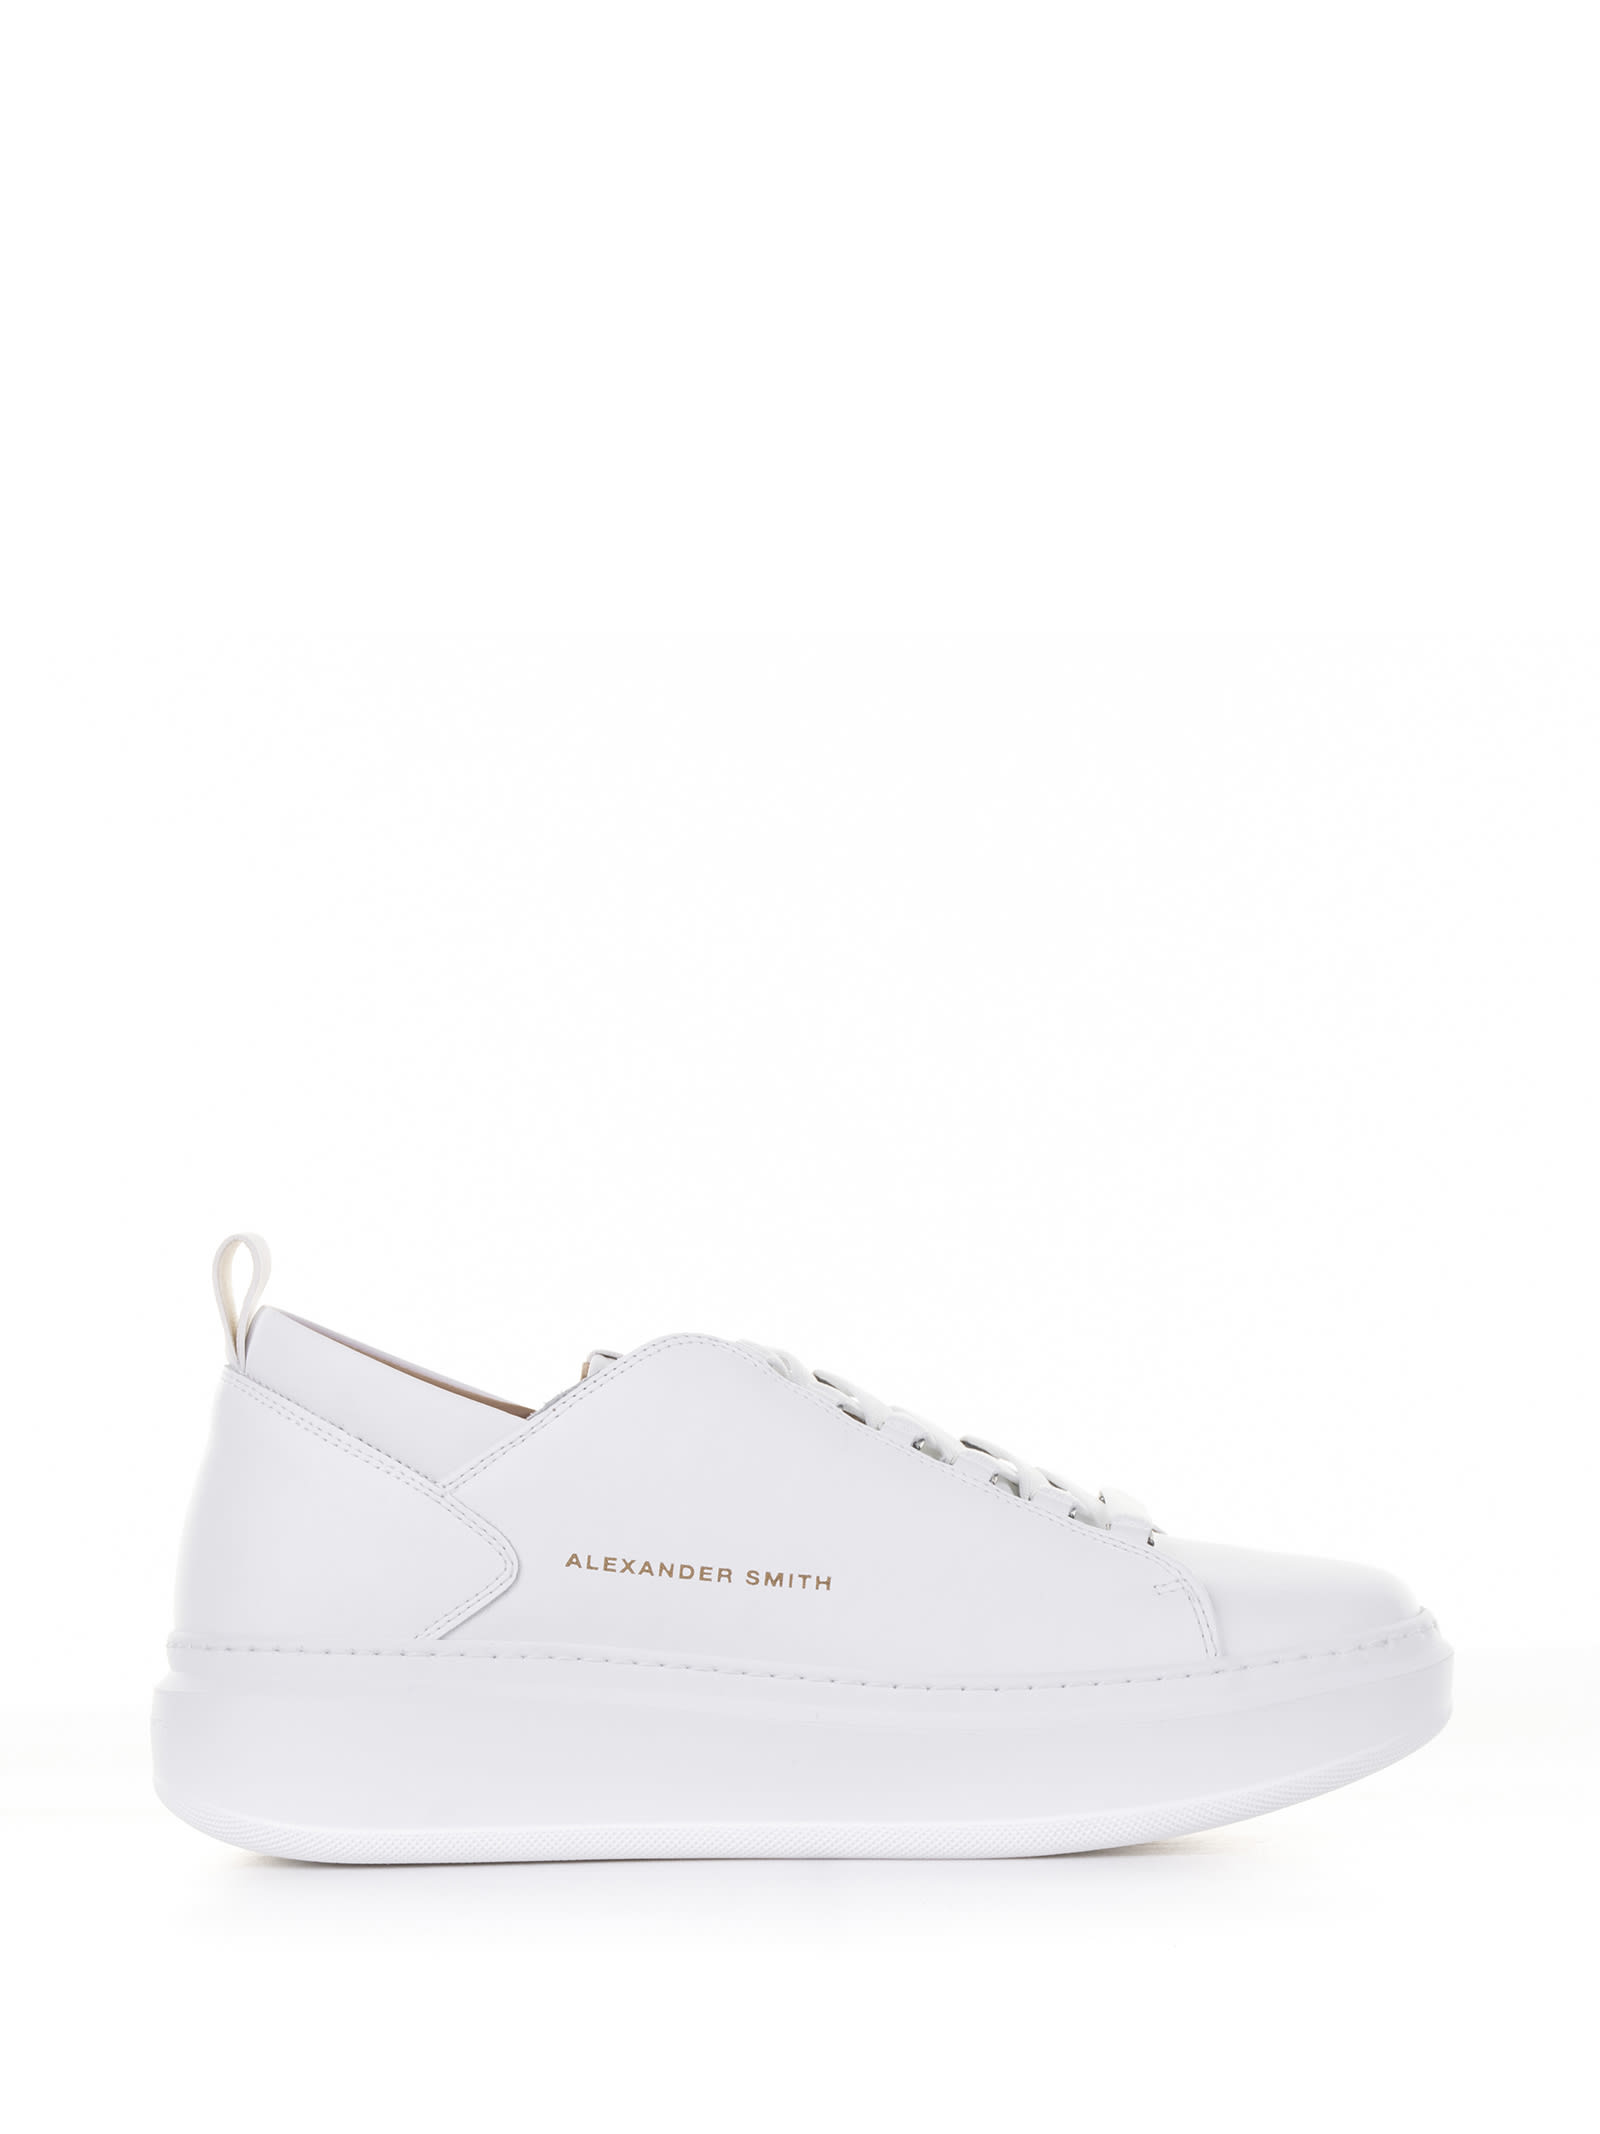 Alexander Smith White Wembley Leather Trainer